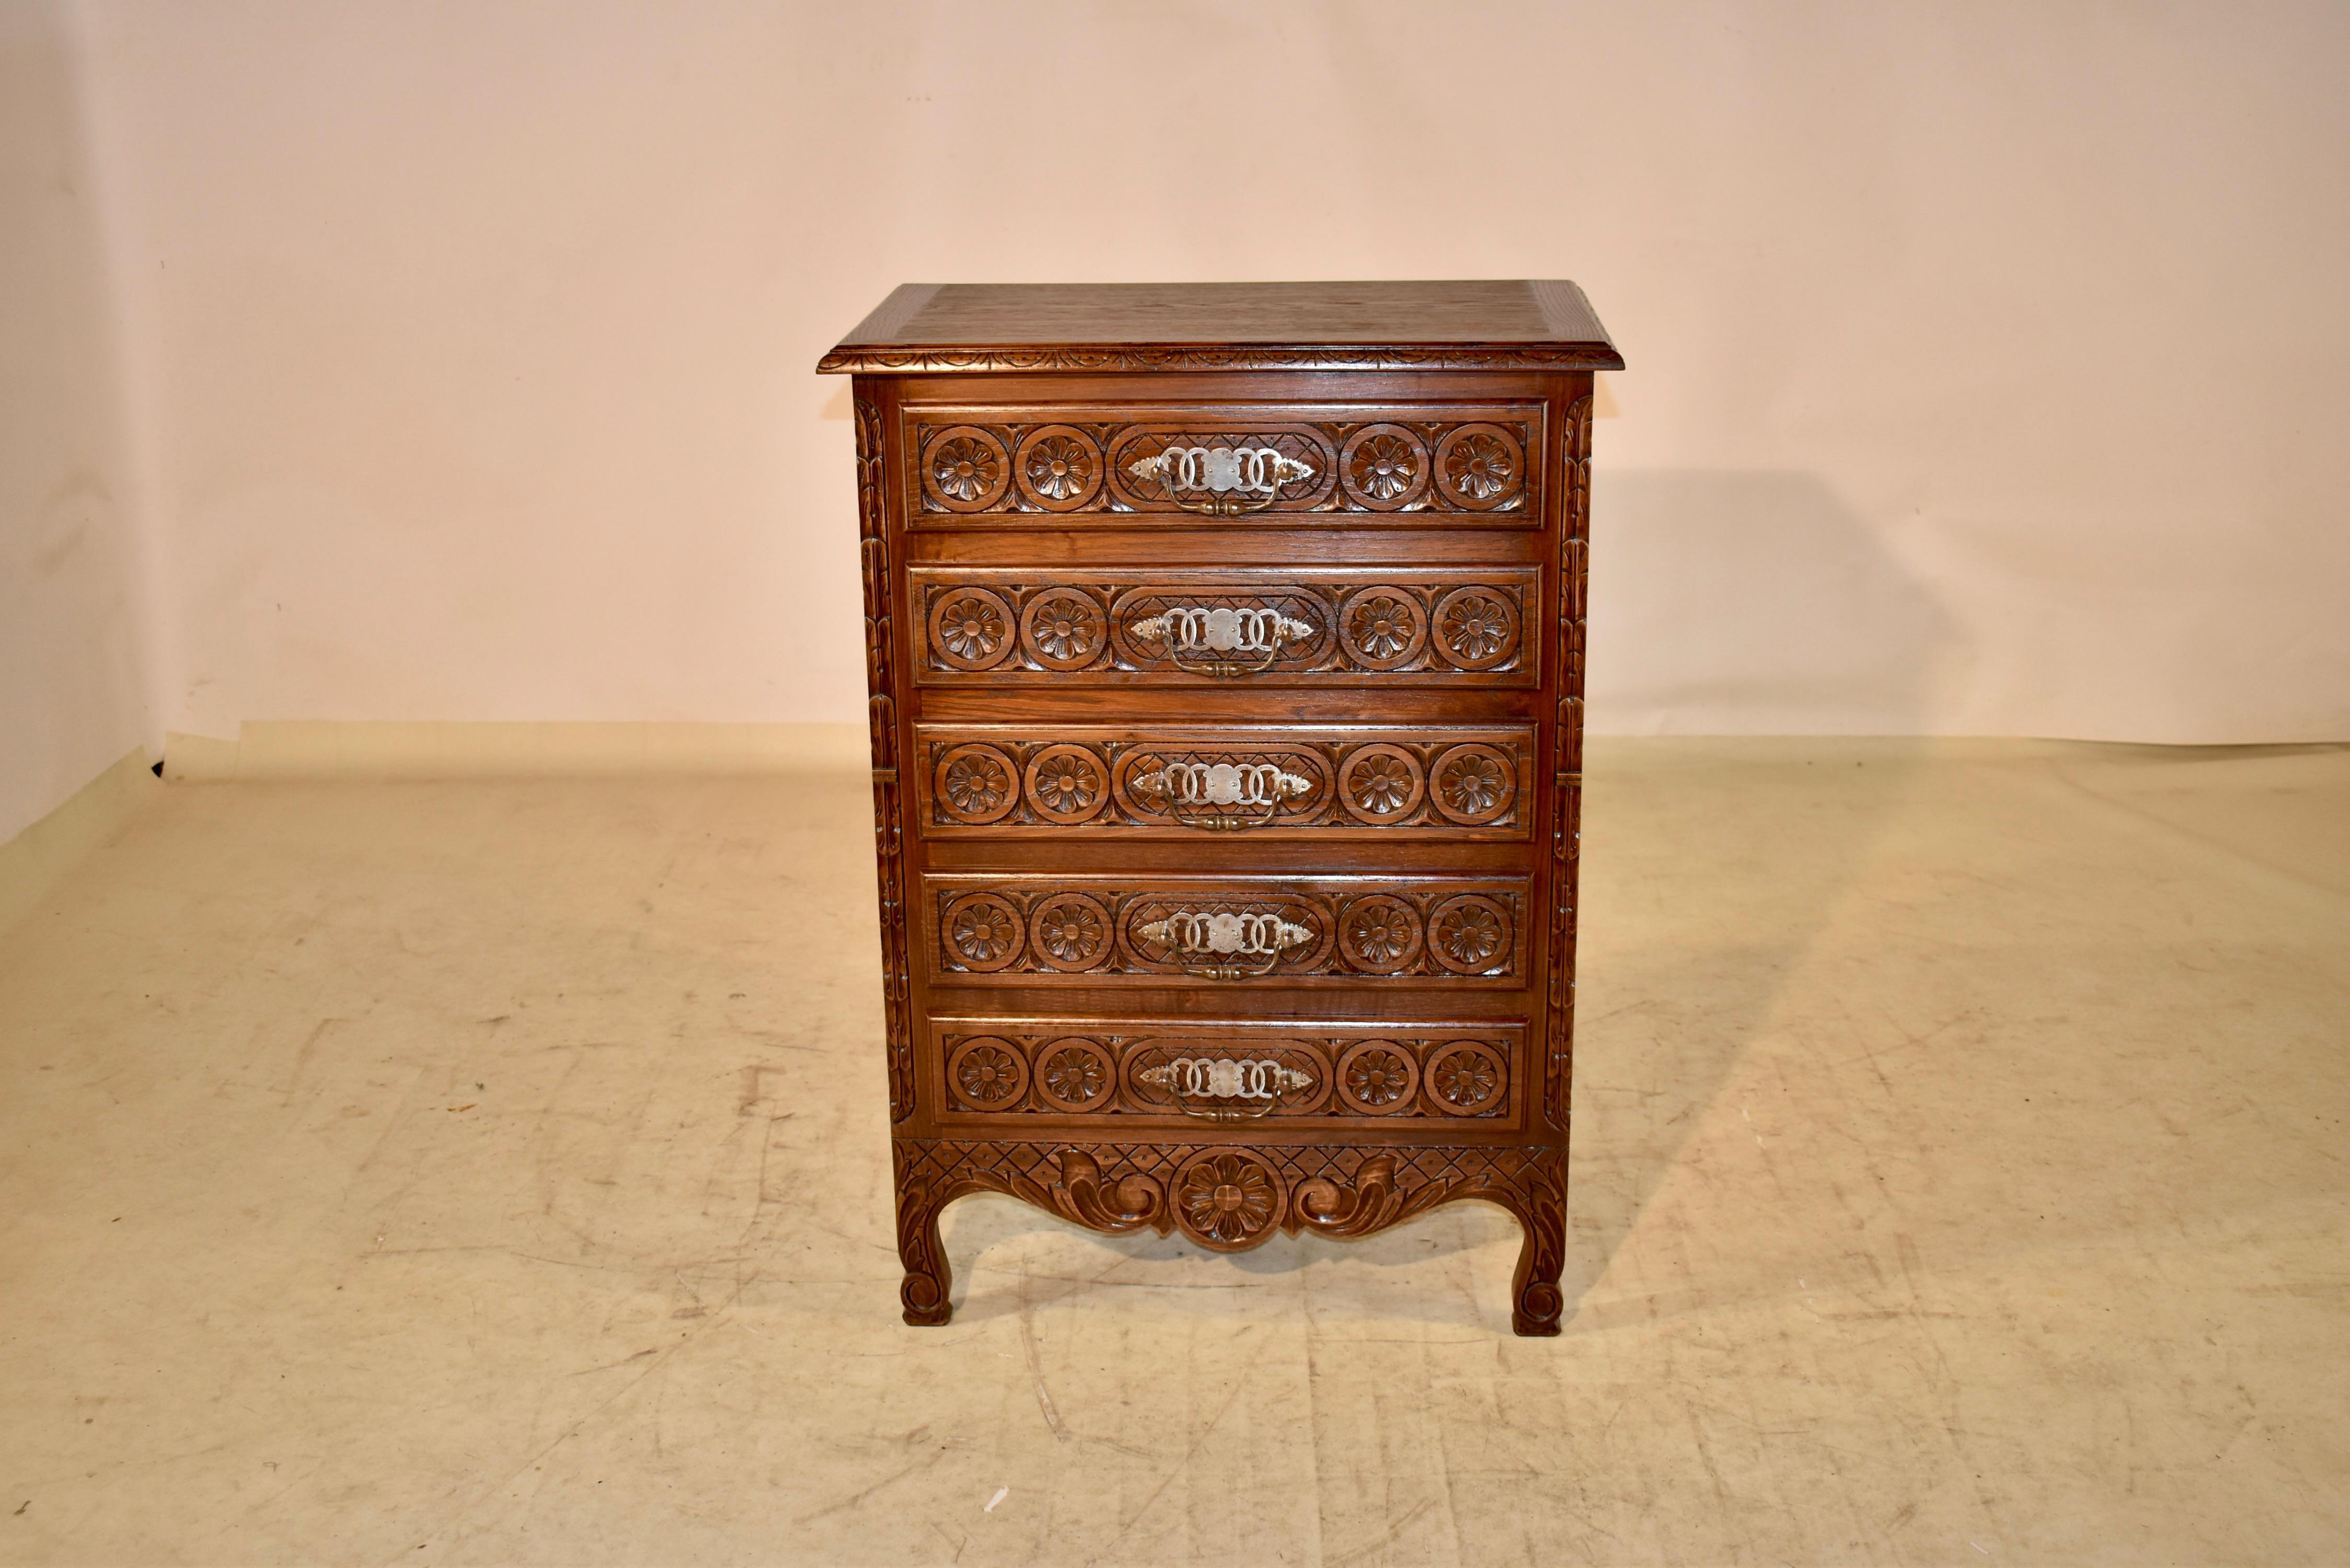 Late 19th century single chest of drawers with a banded top which has a beveled and carved decorated edge, following down to elegantly paneled sides over a scalloped skirt. The case has five drawers with hand carved drawer fronts, flanked by carved